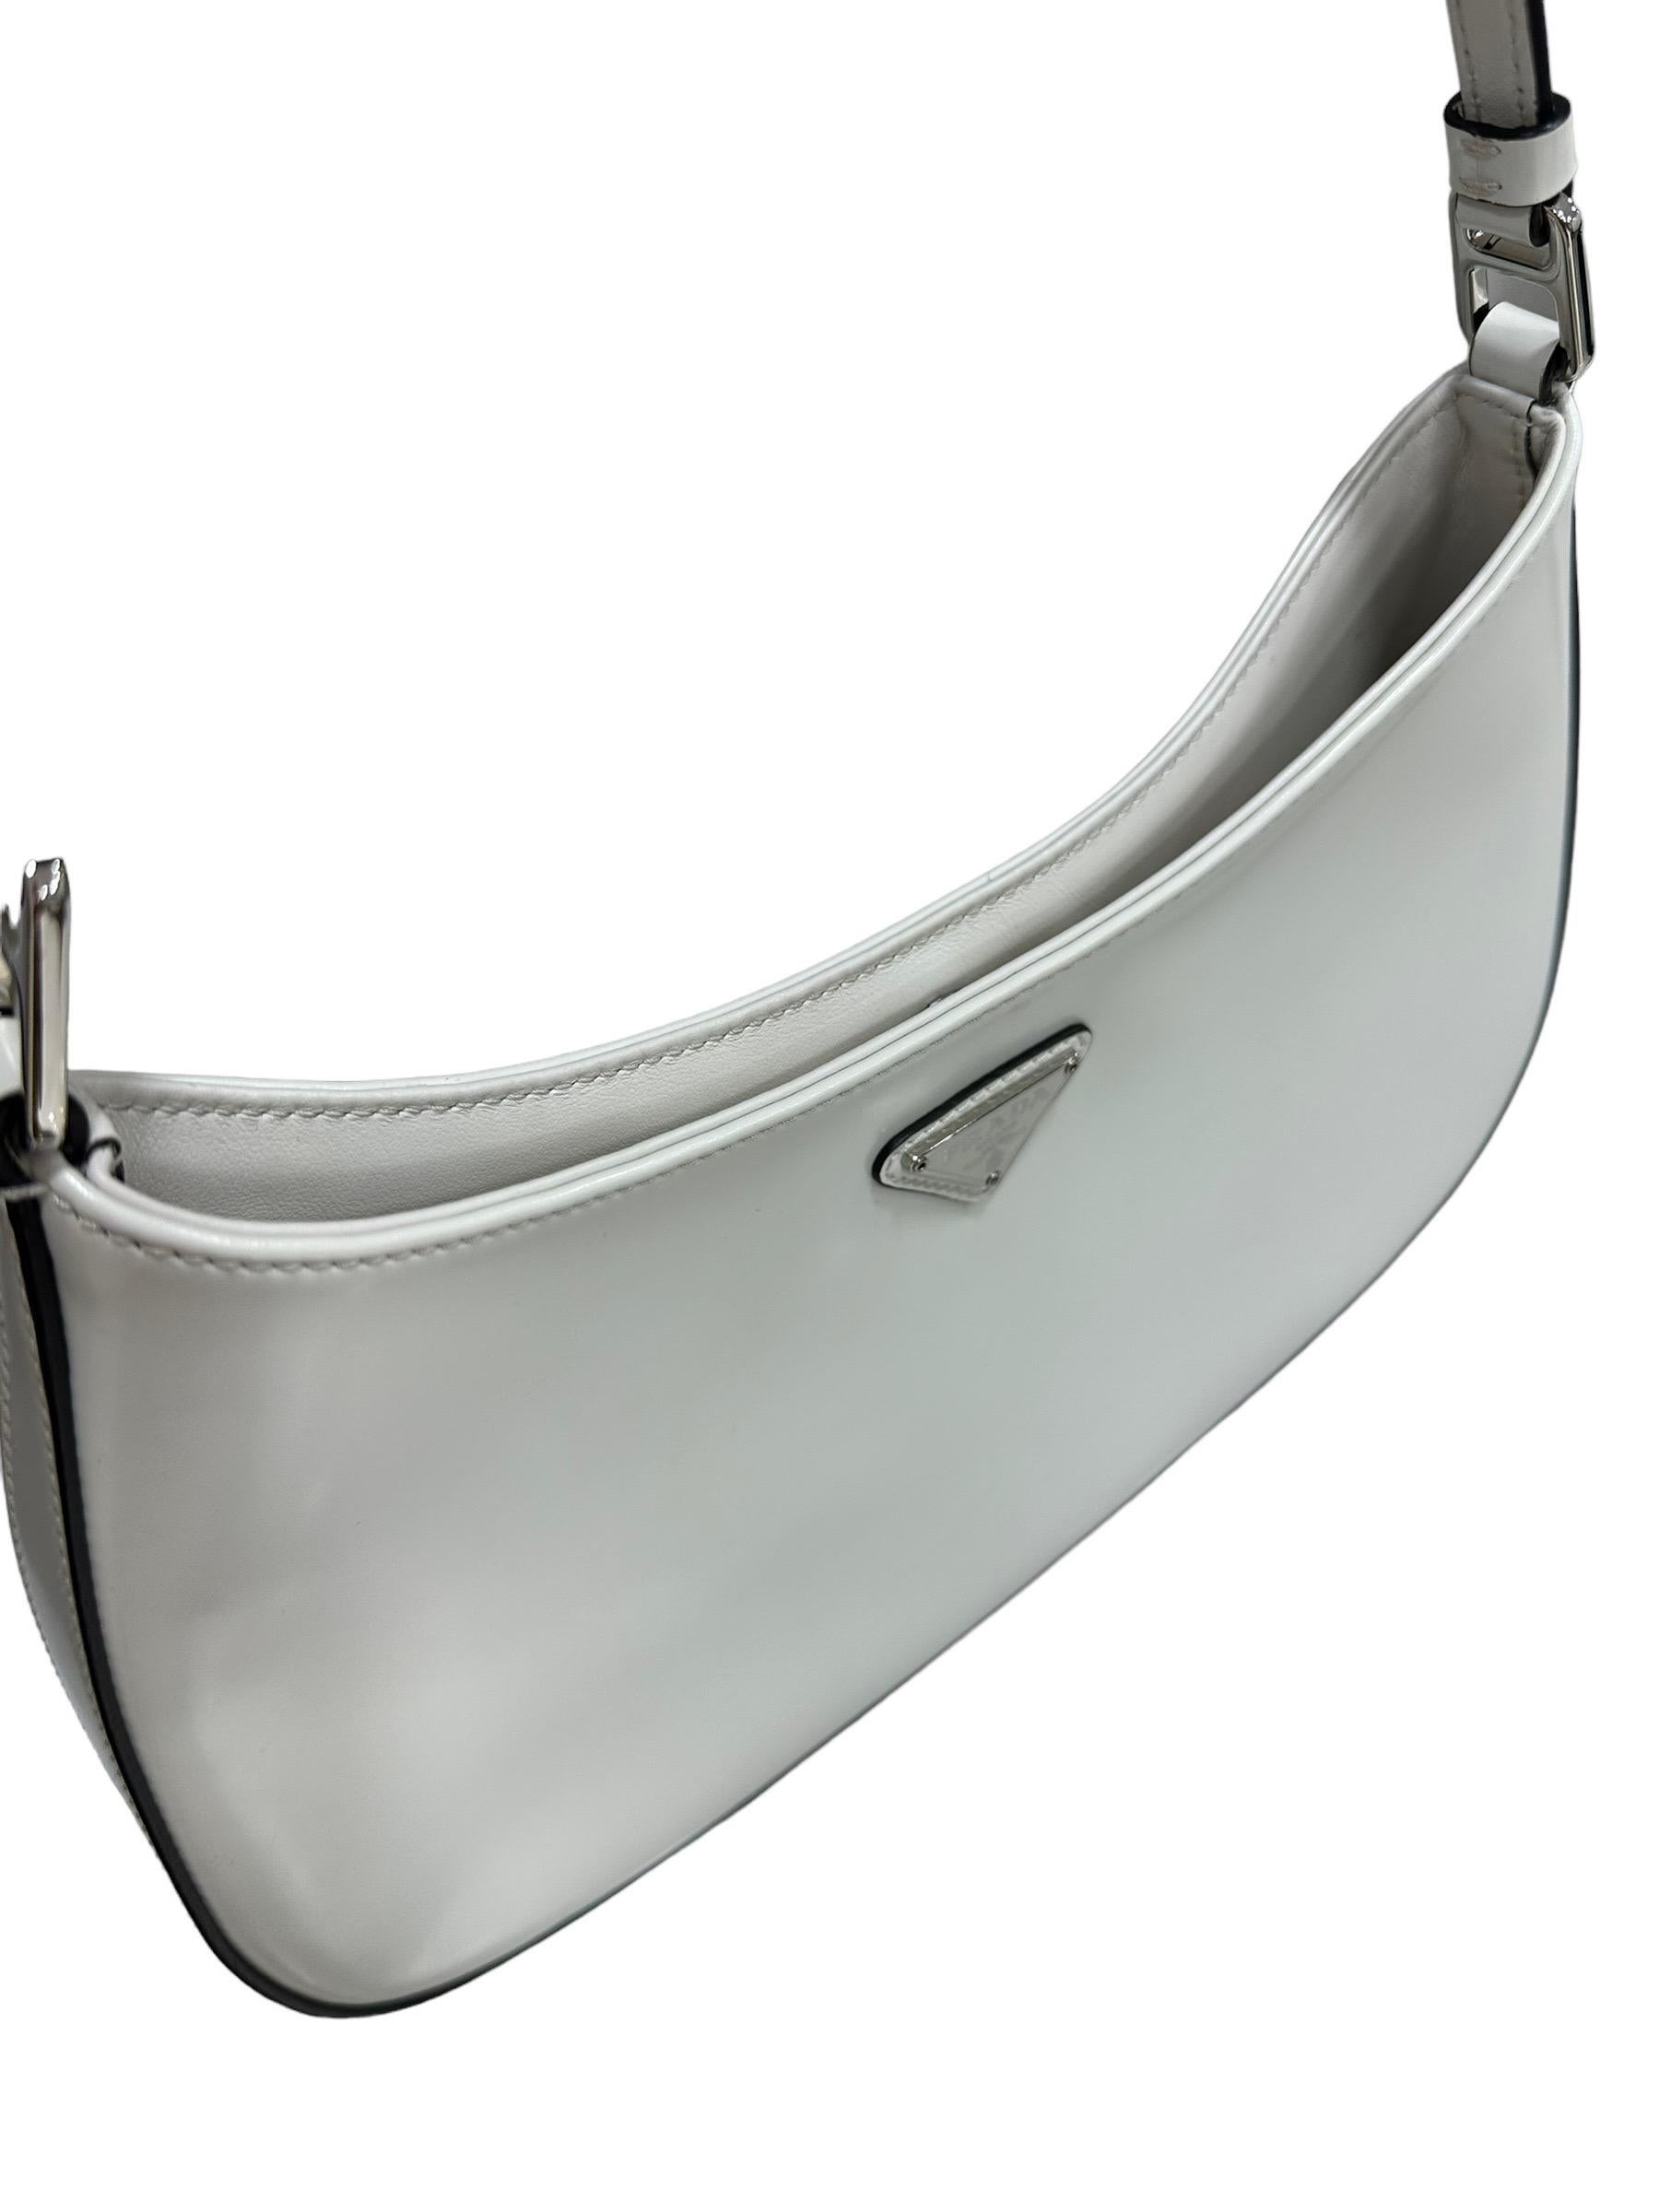 Prada Cleo White Leather Shoulder Bag In Good Condition In Torre Del Greco, IT